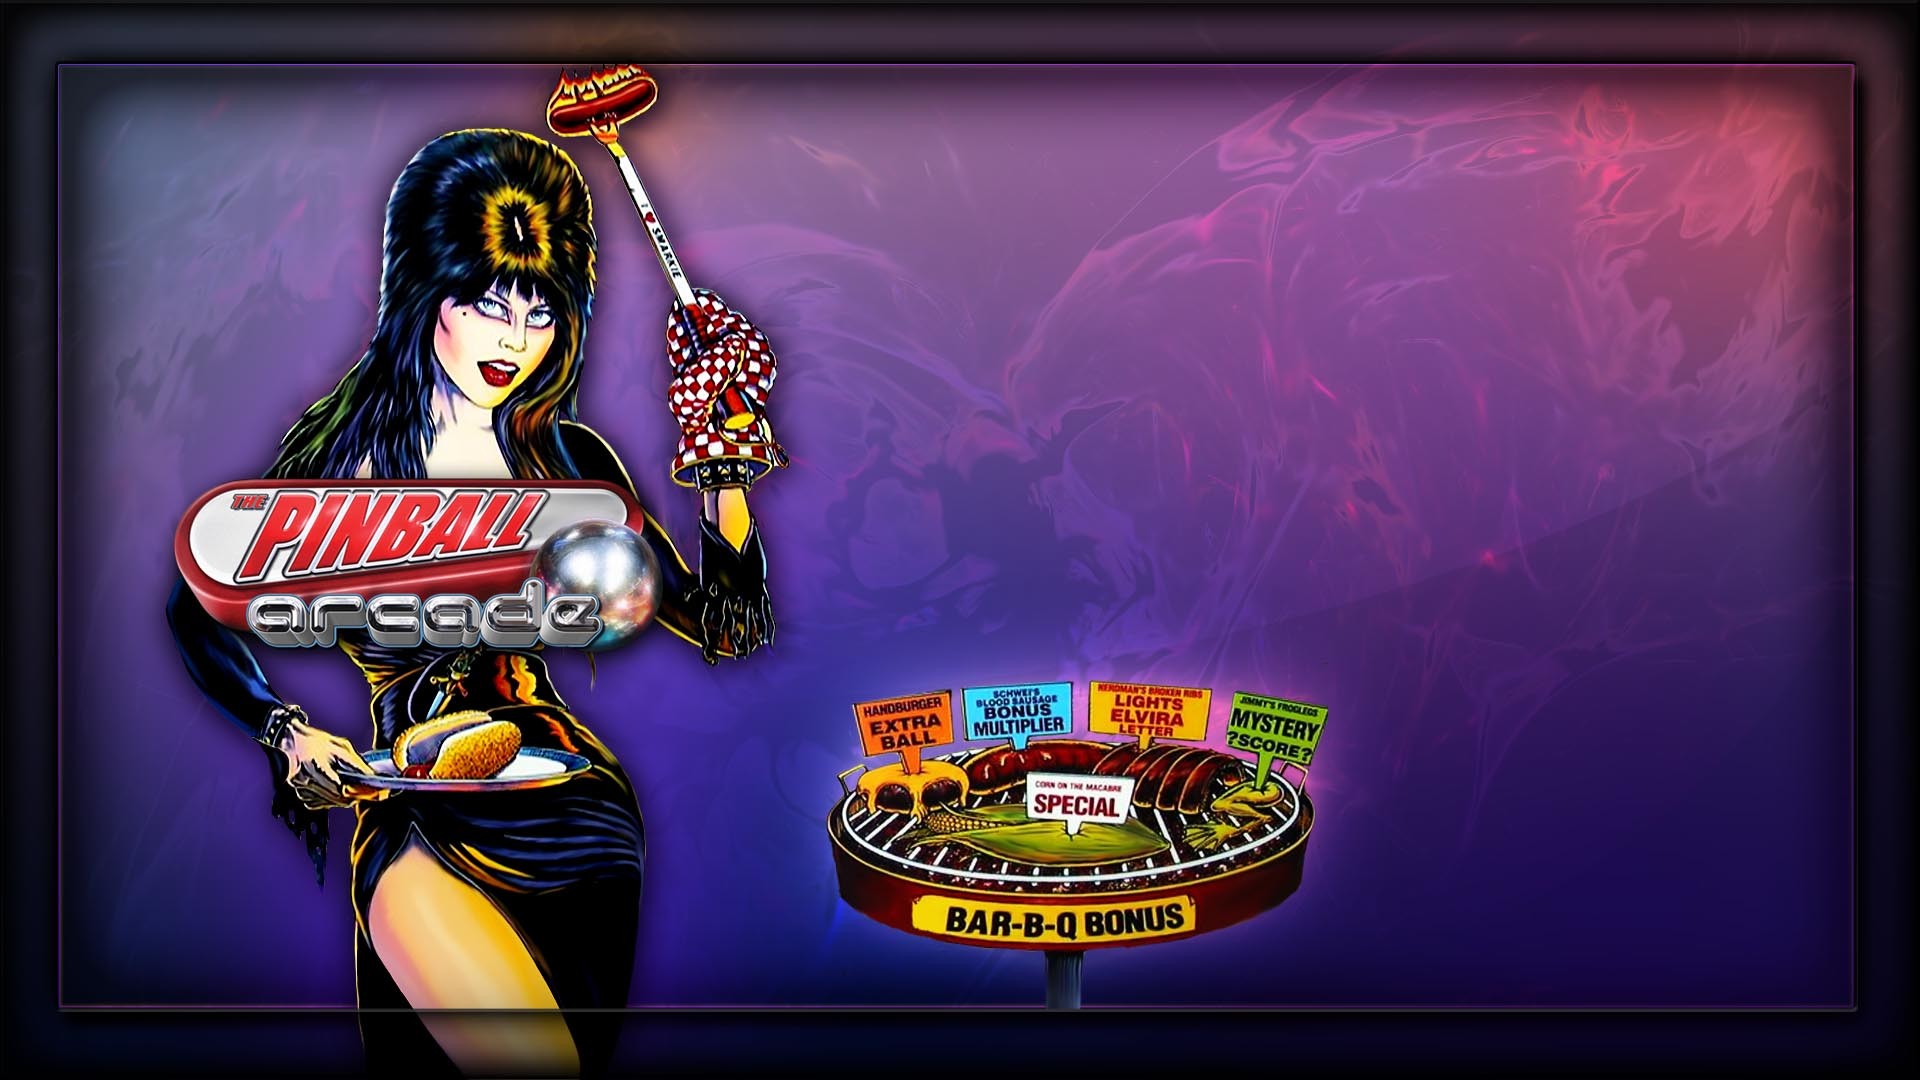 1920x1080 Pinball Arcade - Elvira and the Party Monsters | Steam ... O Letter  Wallpaper